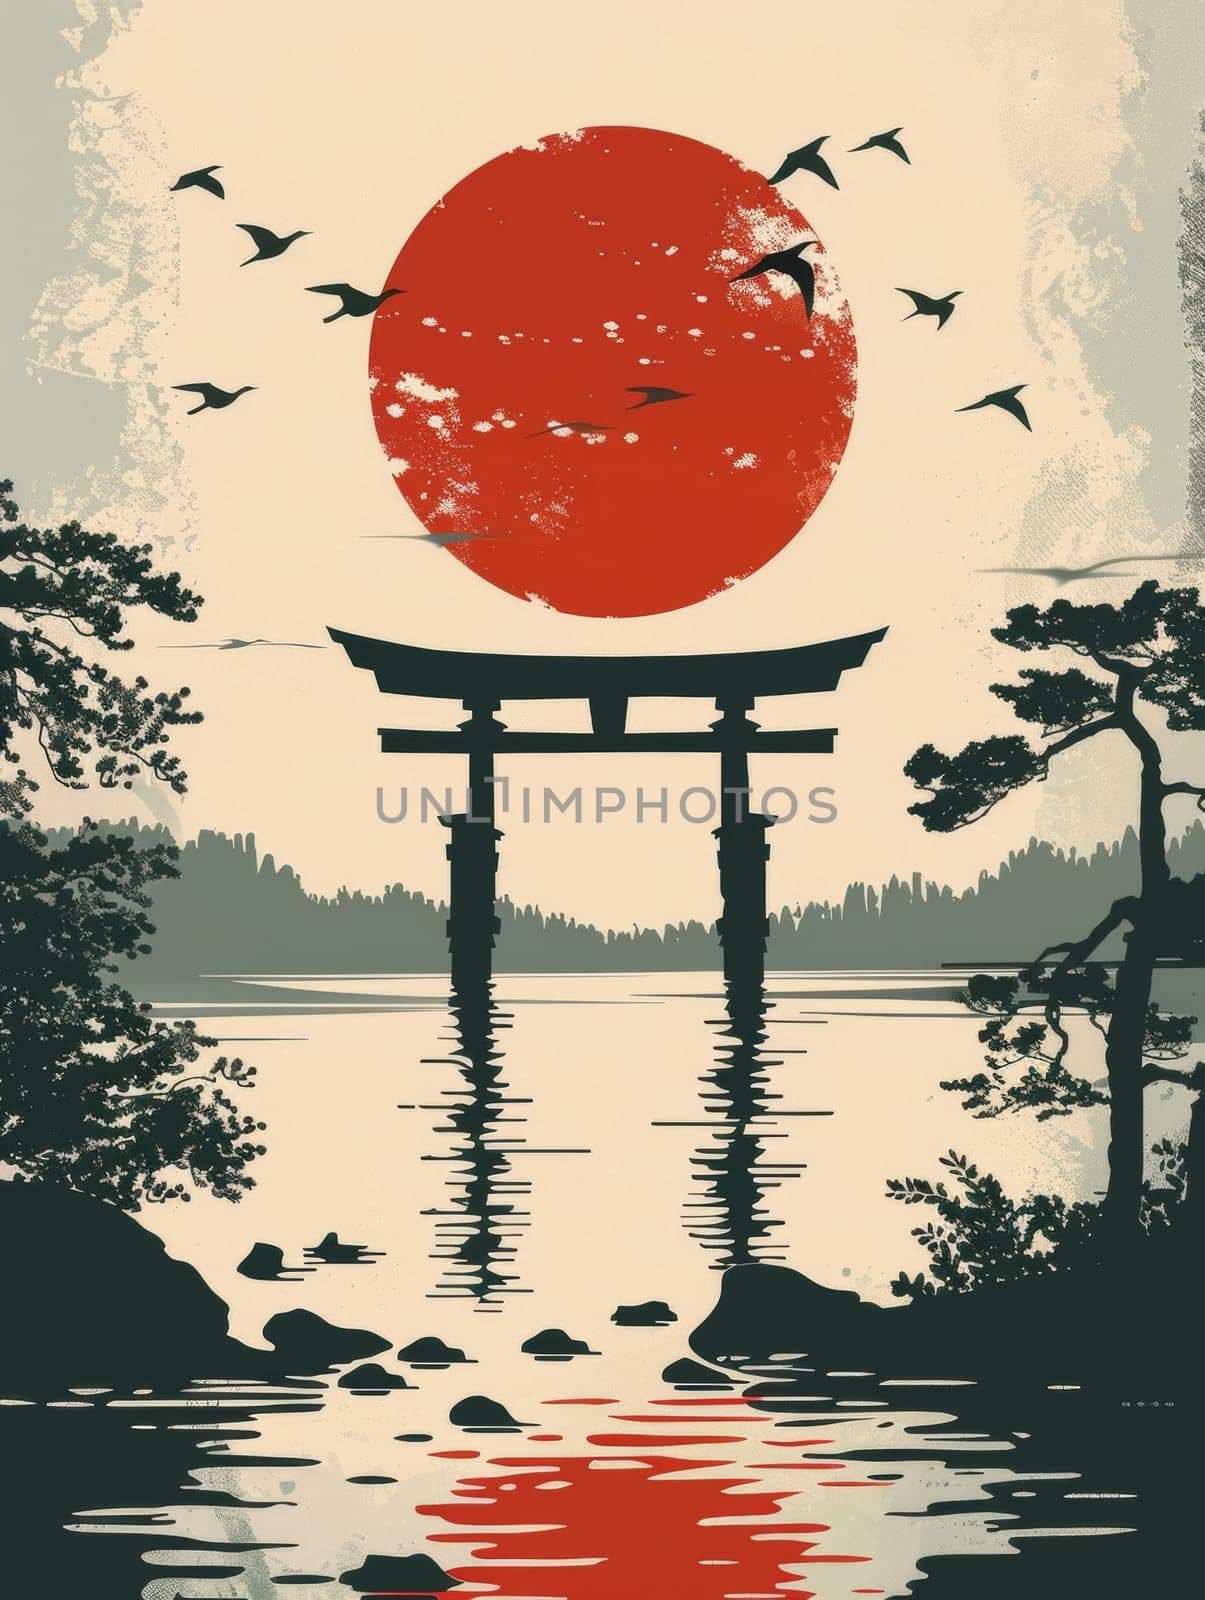 A serene scene with a traditional Torii gate overlooking a calm lake, set against a large red sun and a flight of birds at dusk